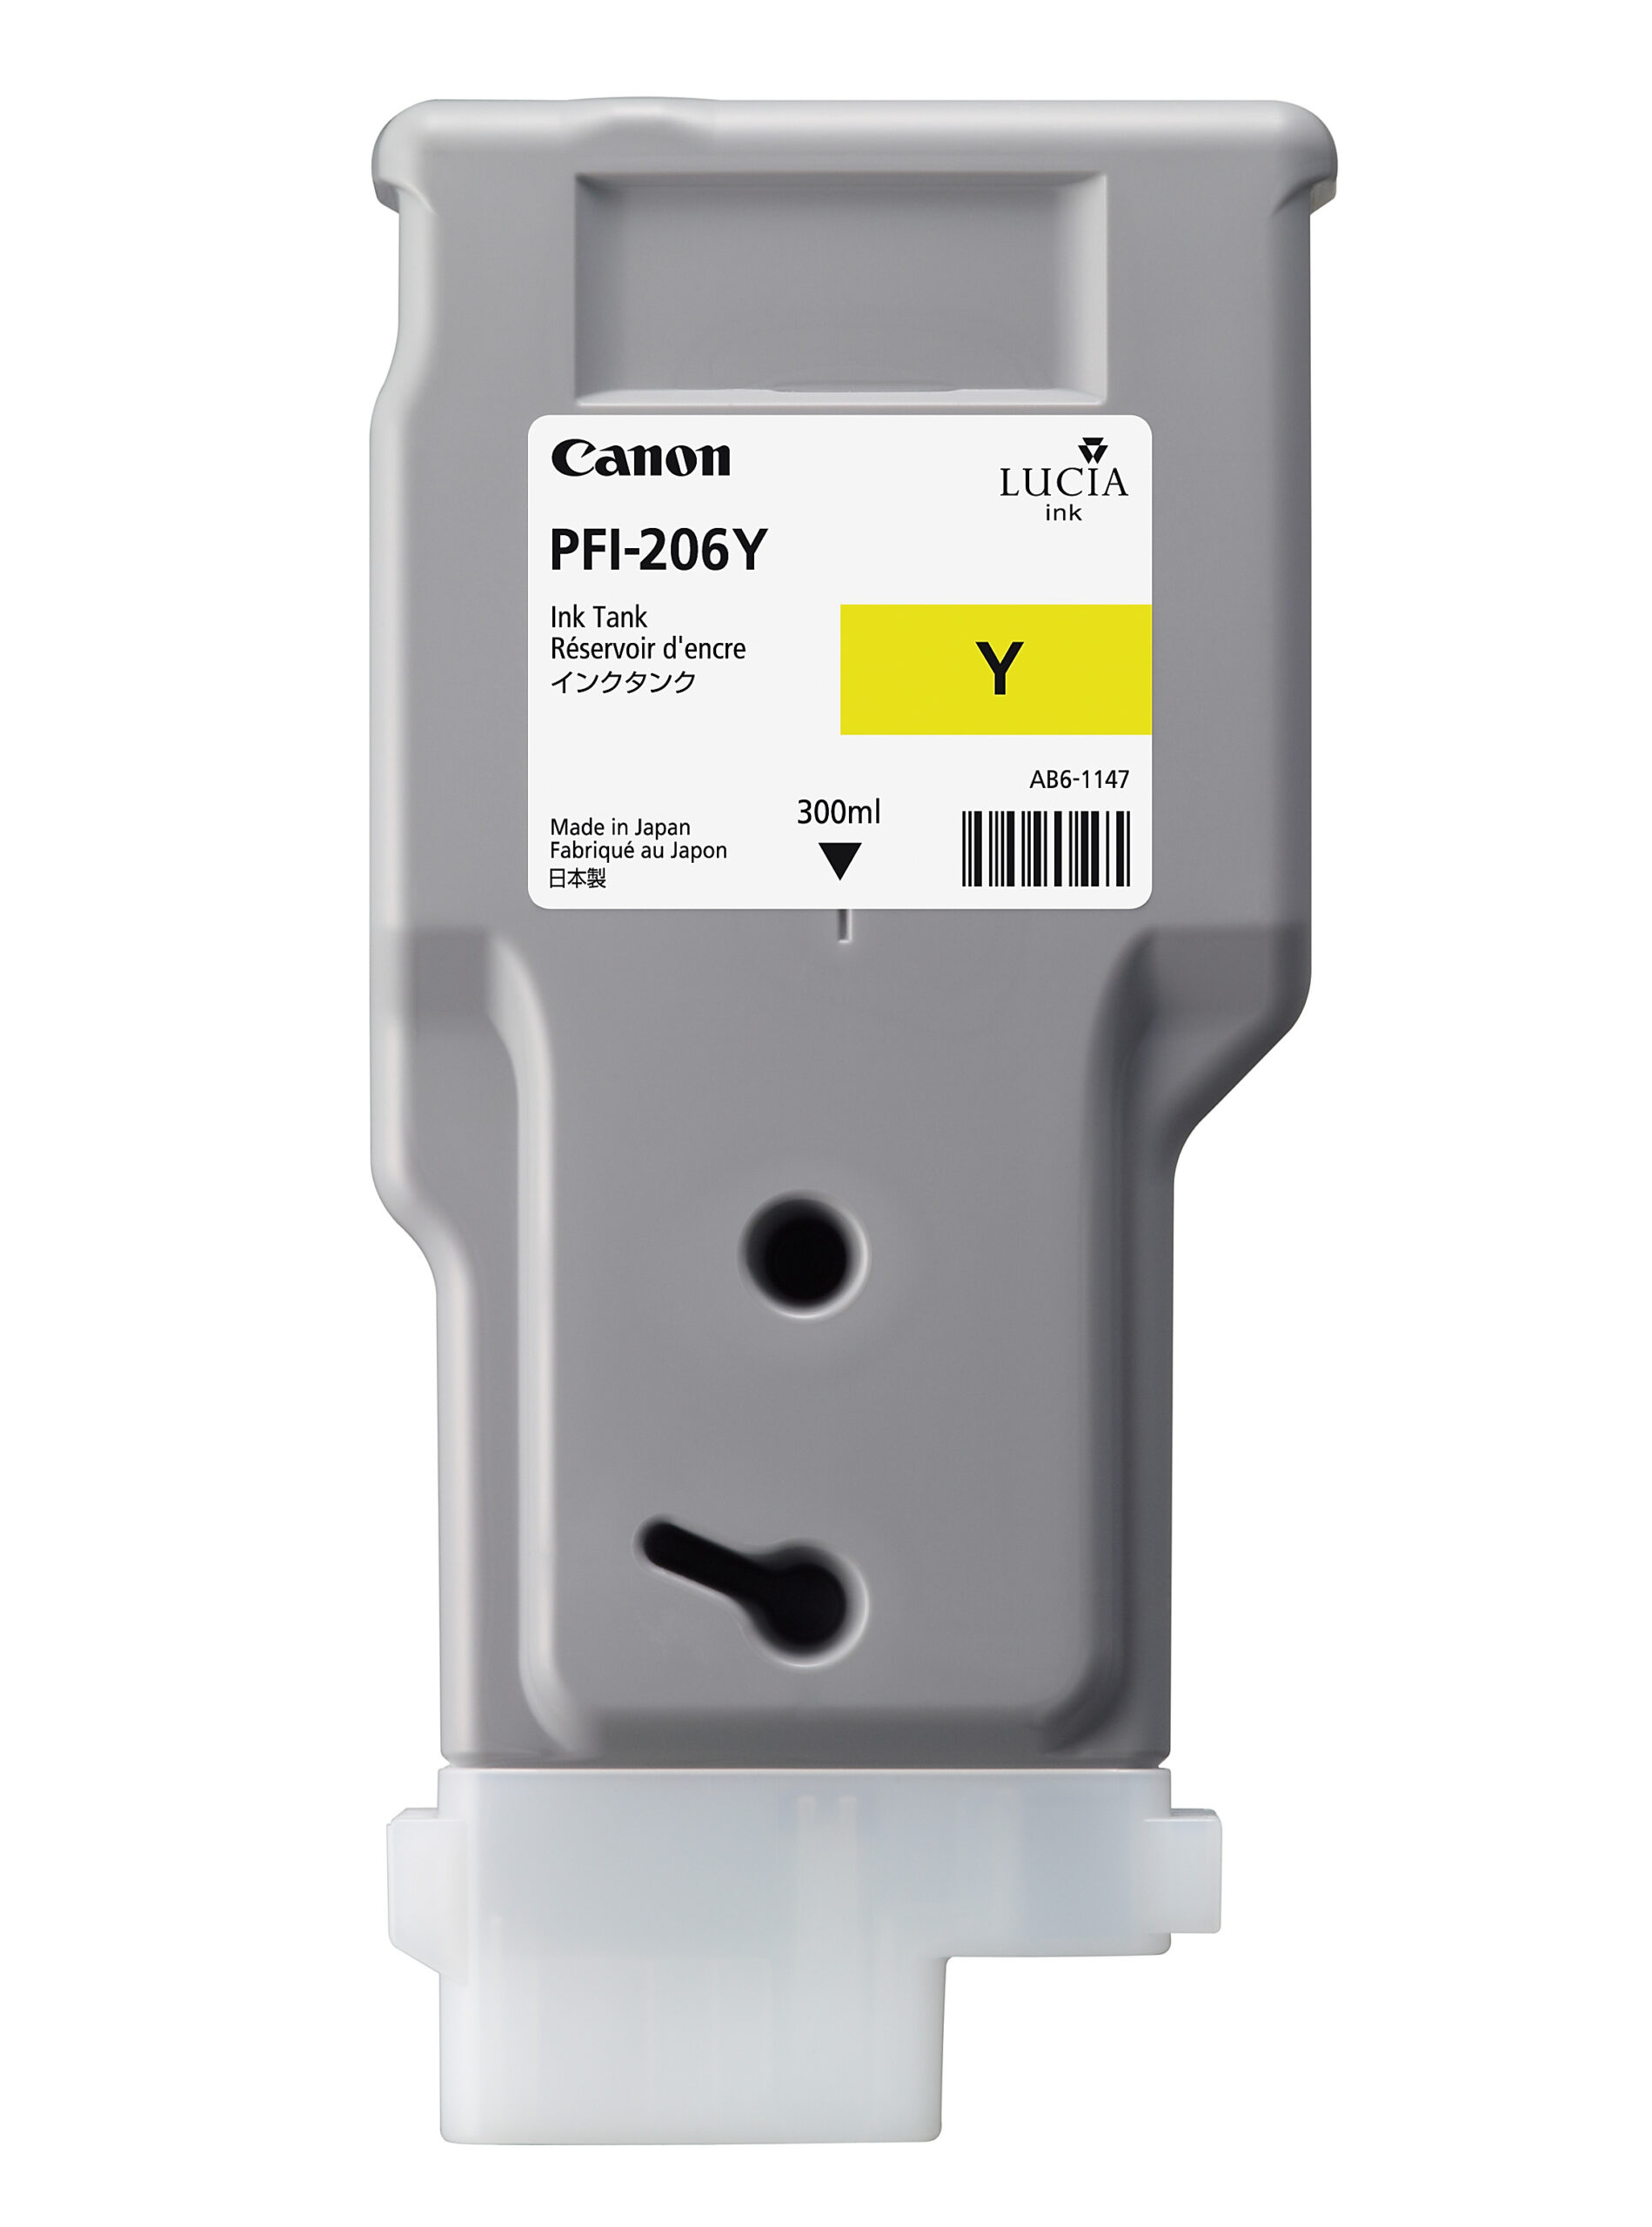 Canon PFI-206Y Printer Ink Cartridge - Yellow Ink Tank - 300ml - 5306B001AA - for Canon iPF6400, iPF6400S, iPF6400SE, iPF6450 Printers - express delivery from GDS - Graphic Design Supplies Ltd